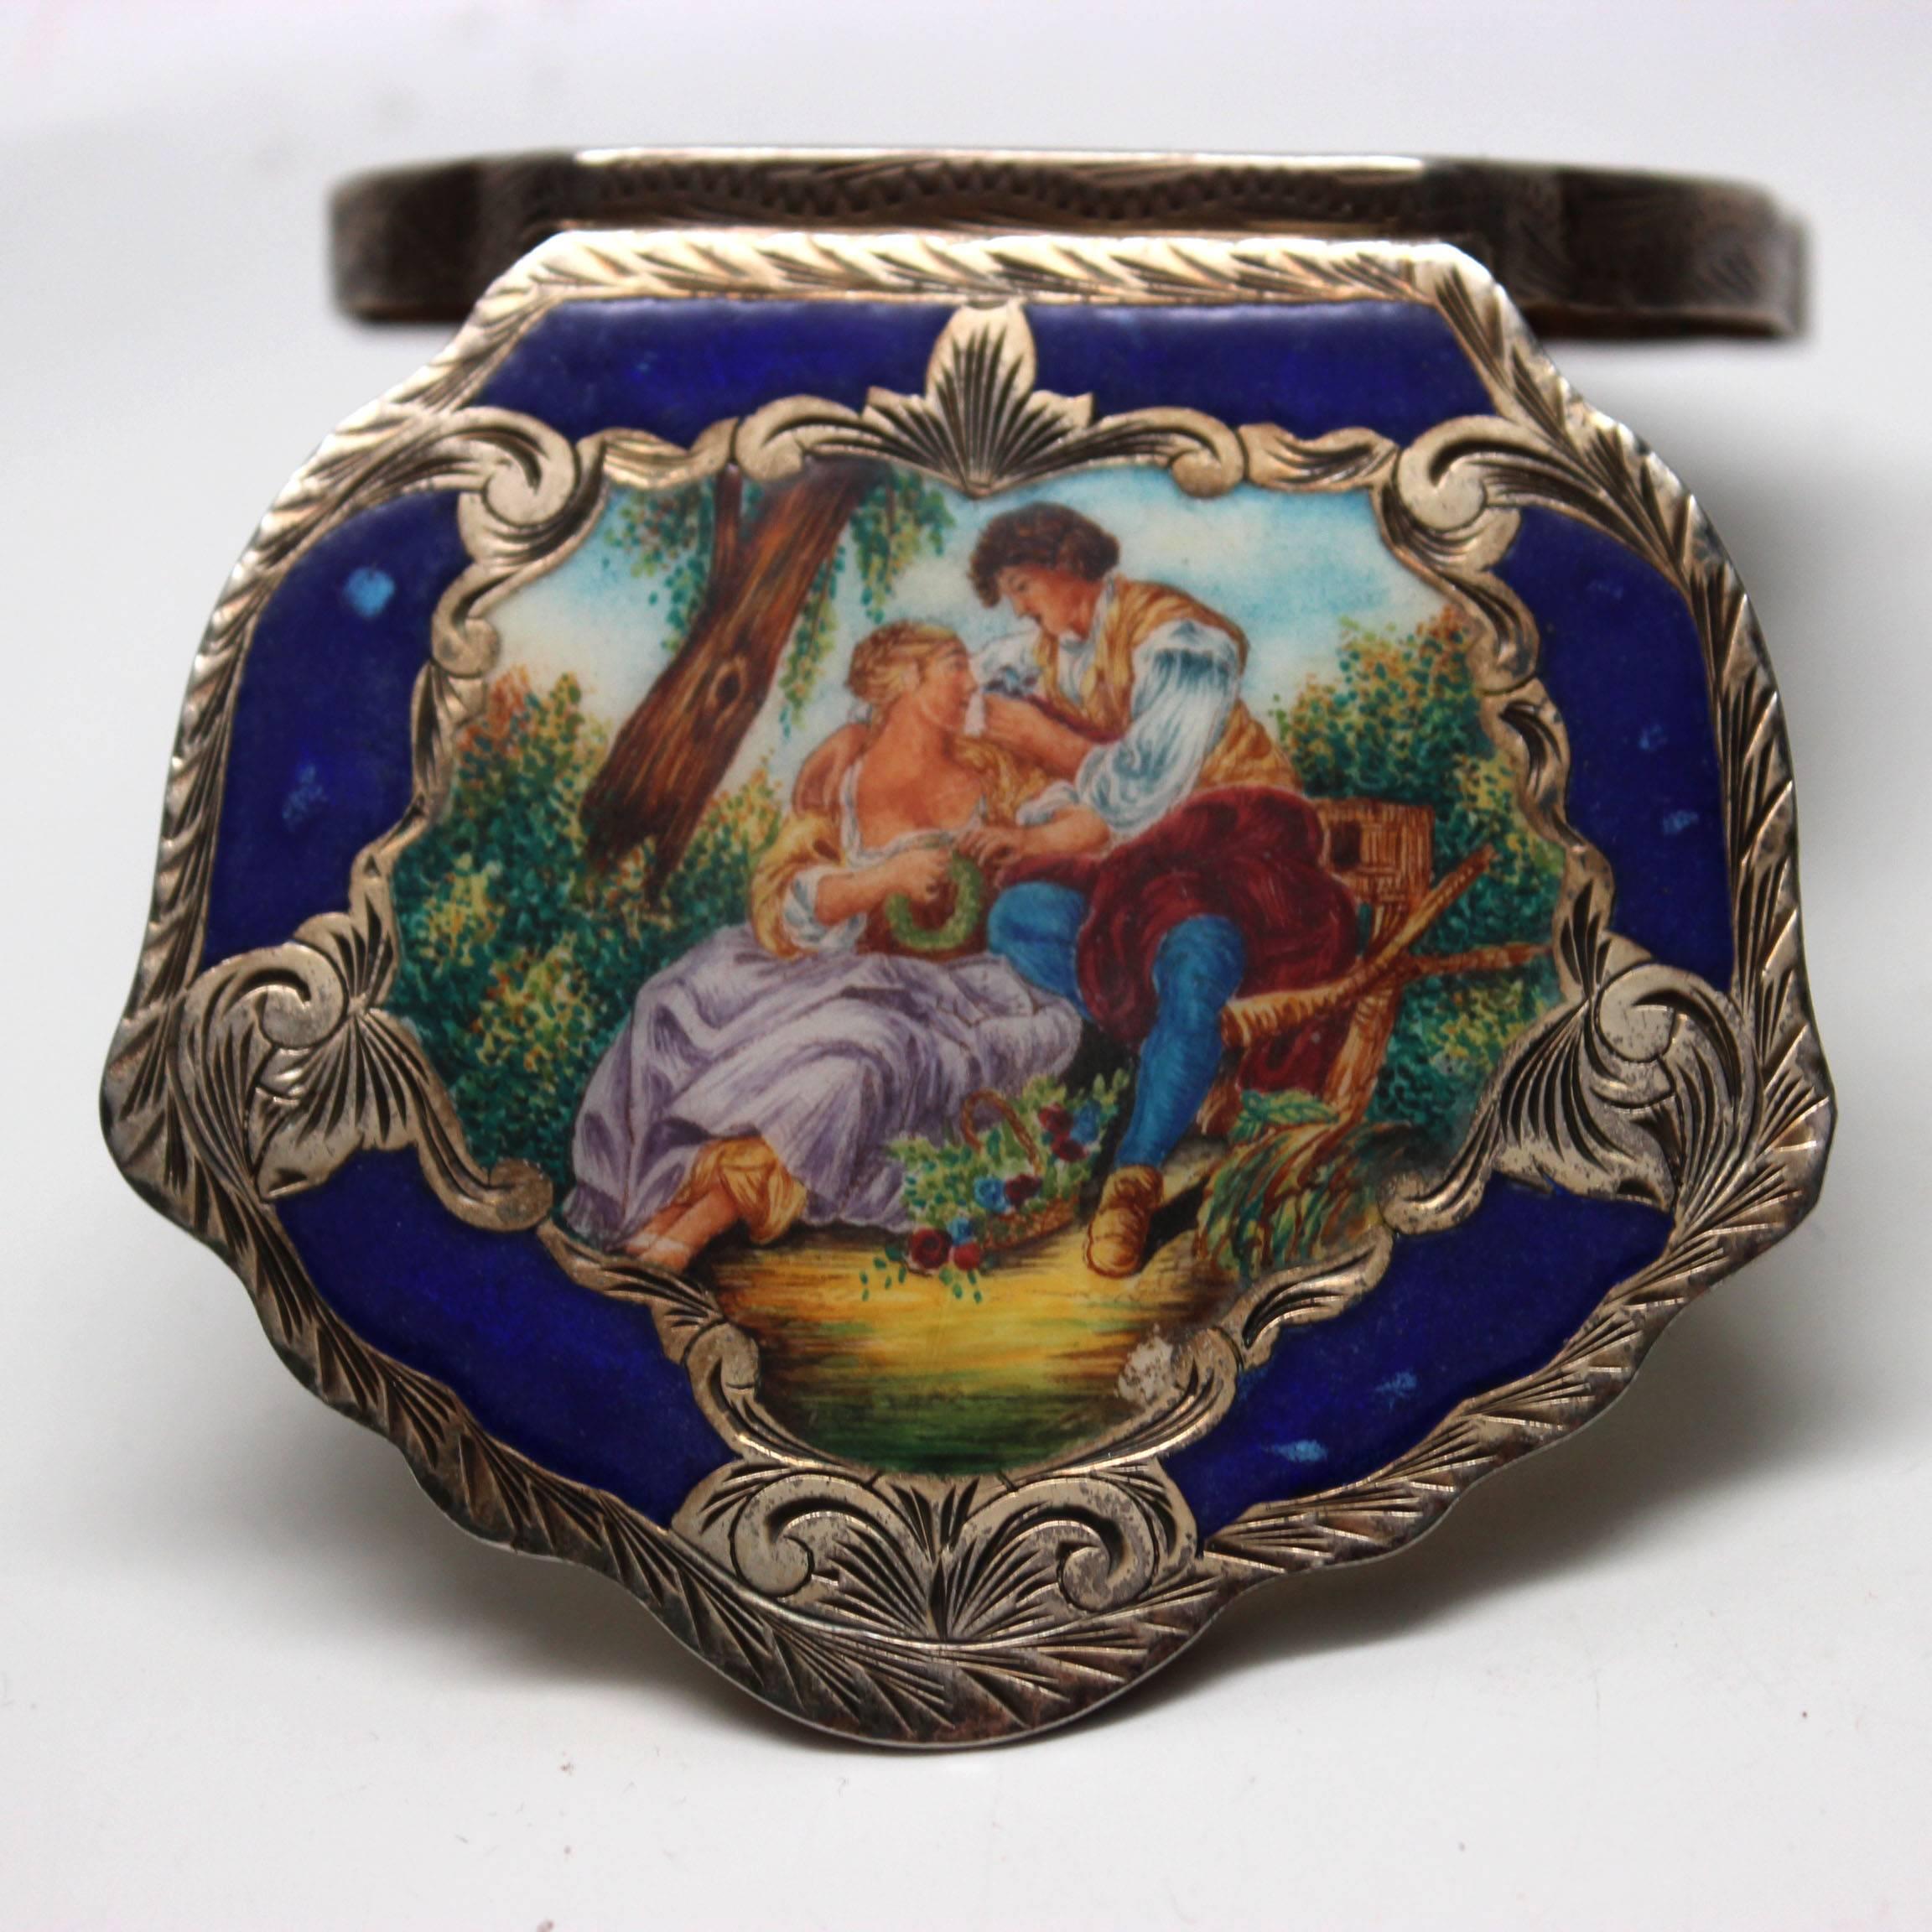 This beautiful compact is made of stamped 800 sterling and hand painted enamel, with a faux lapis trim framing the image and detailed sterling. The colorful courting scene is Francois Boucher's 